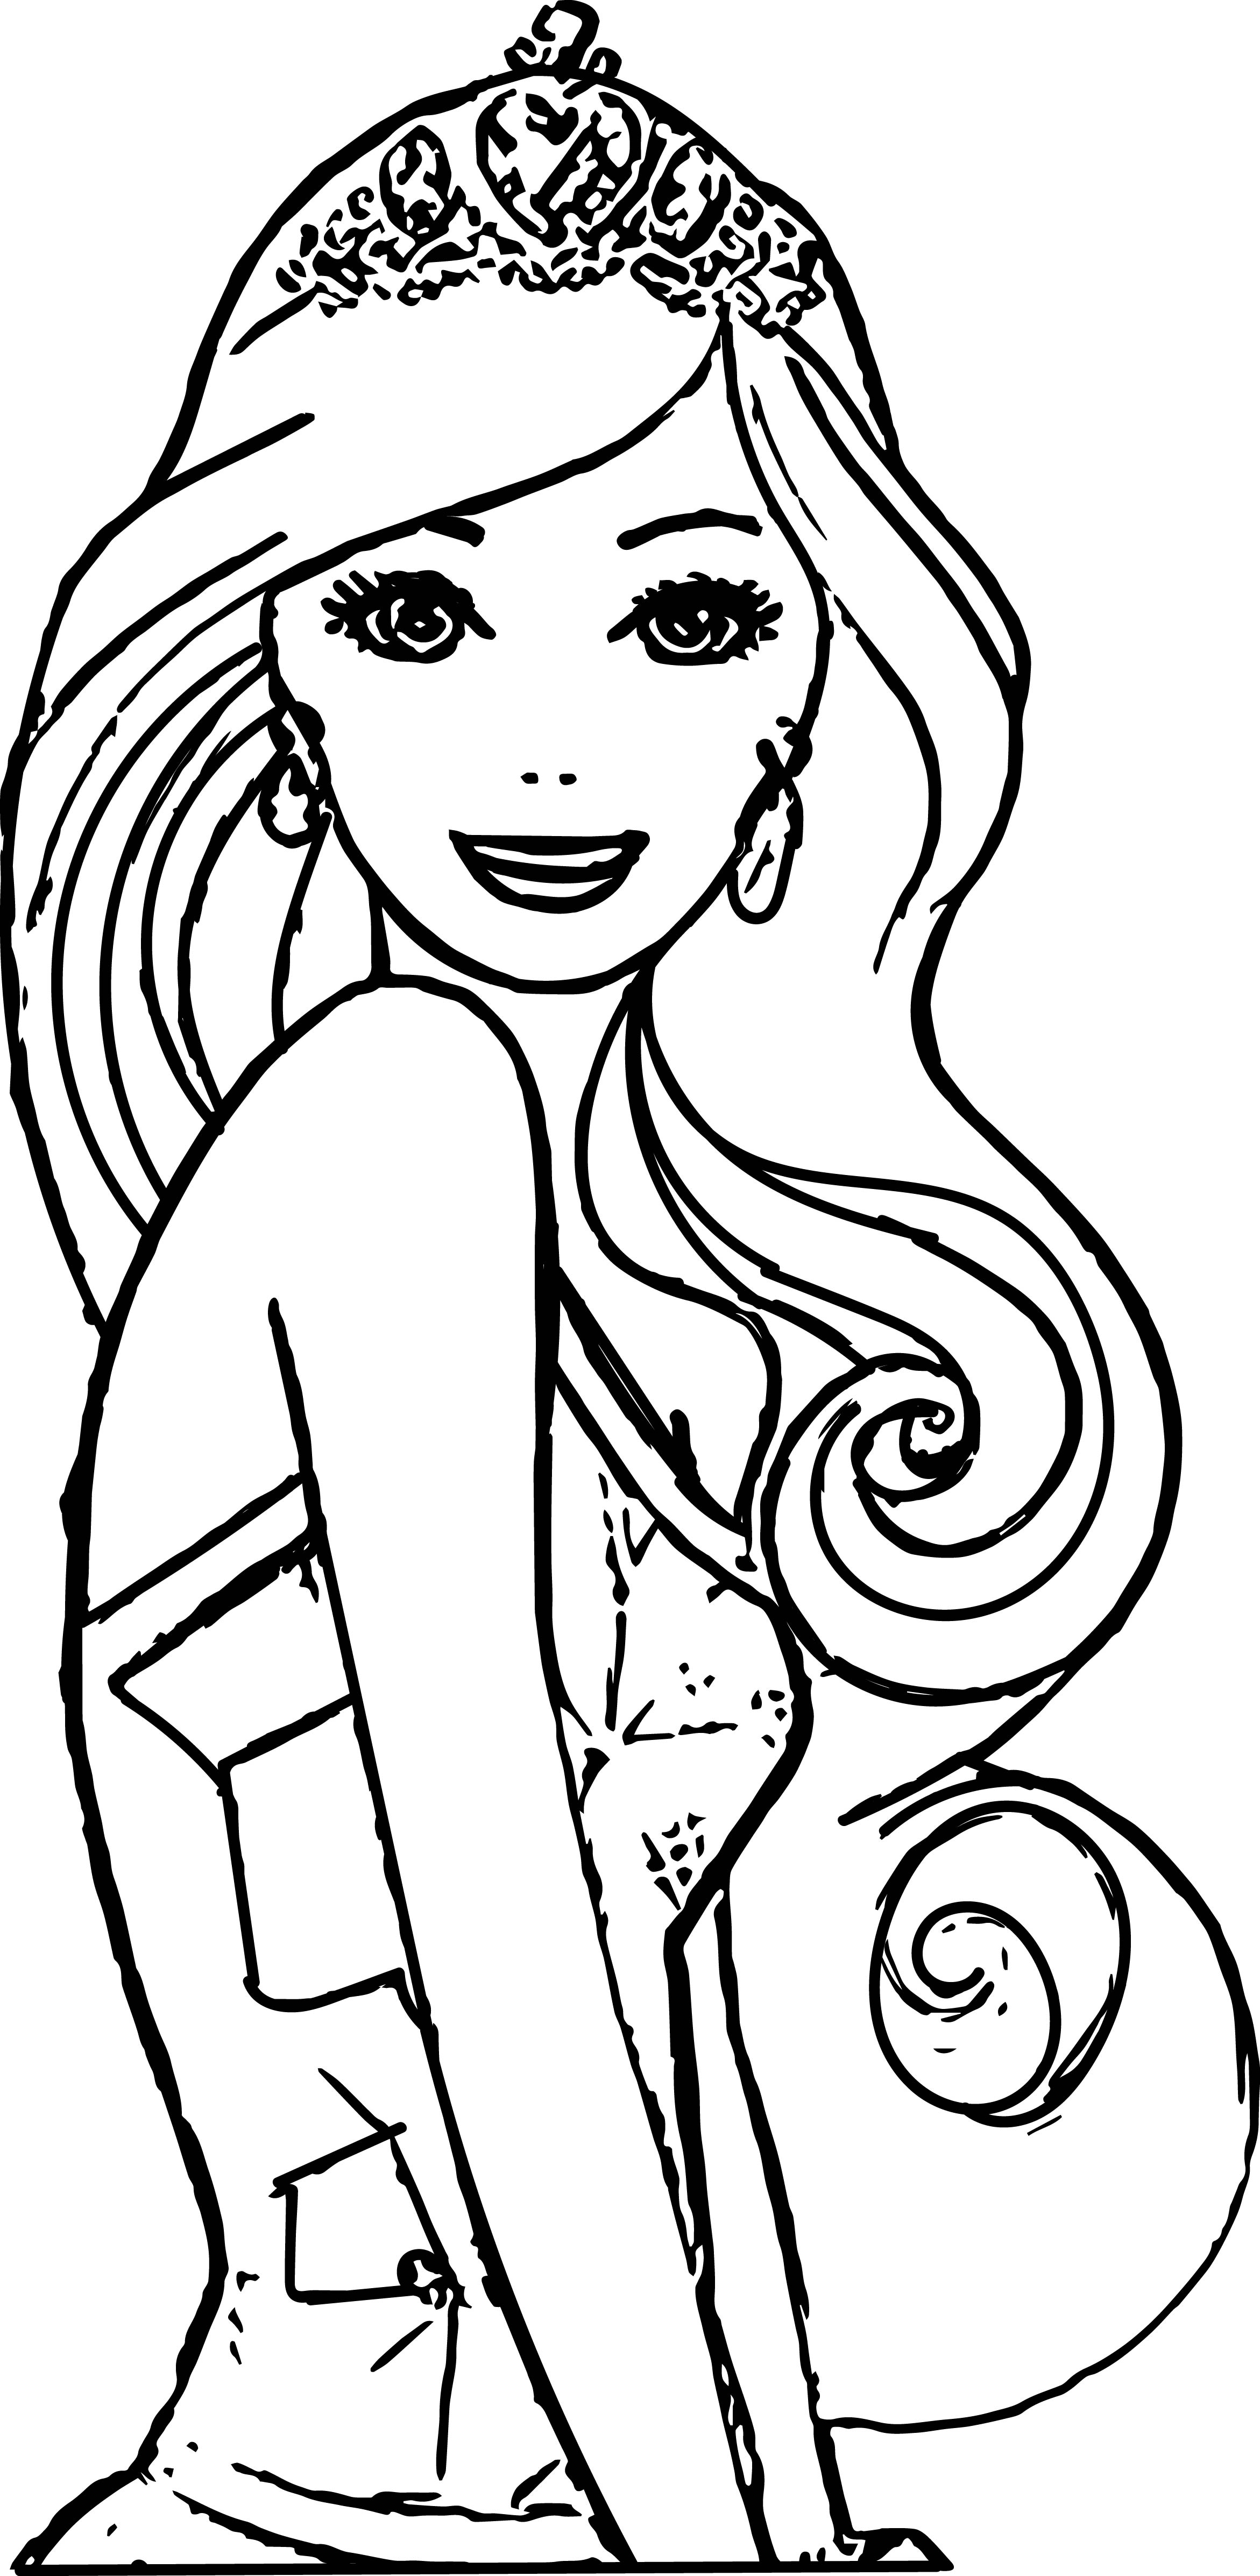 Coloring Pages With Barbie Barbie Wedding Coloring Pages at